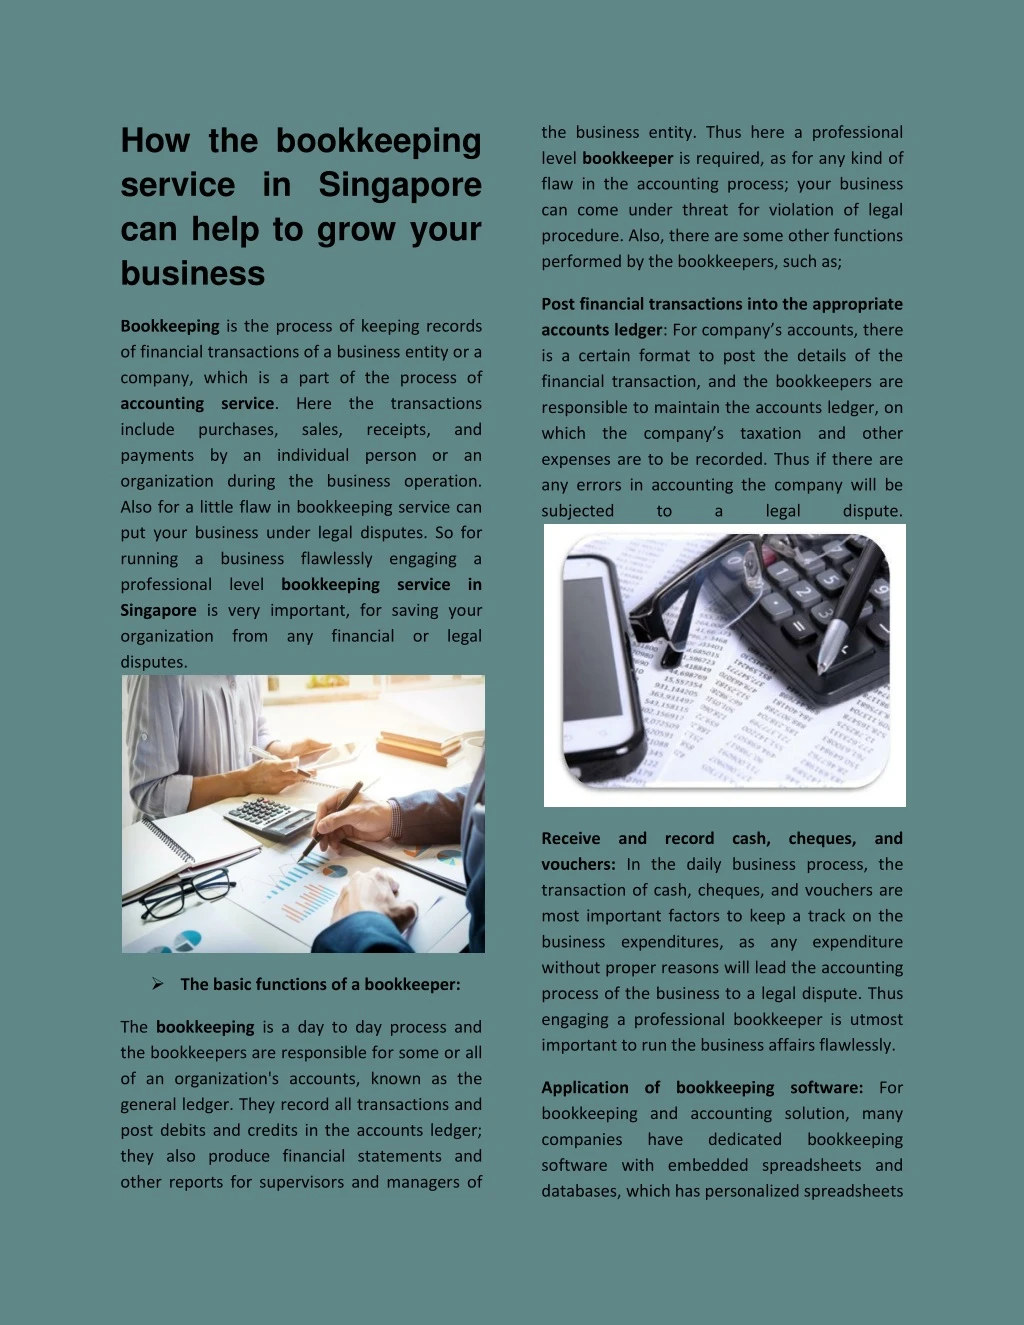 how the bookkeeping service in singapore can help